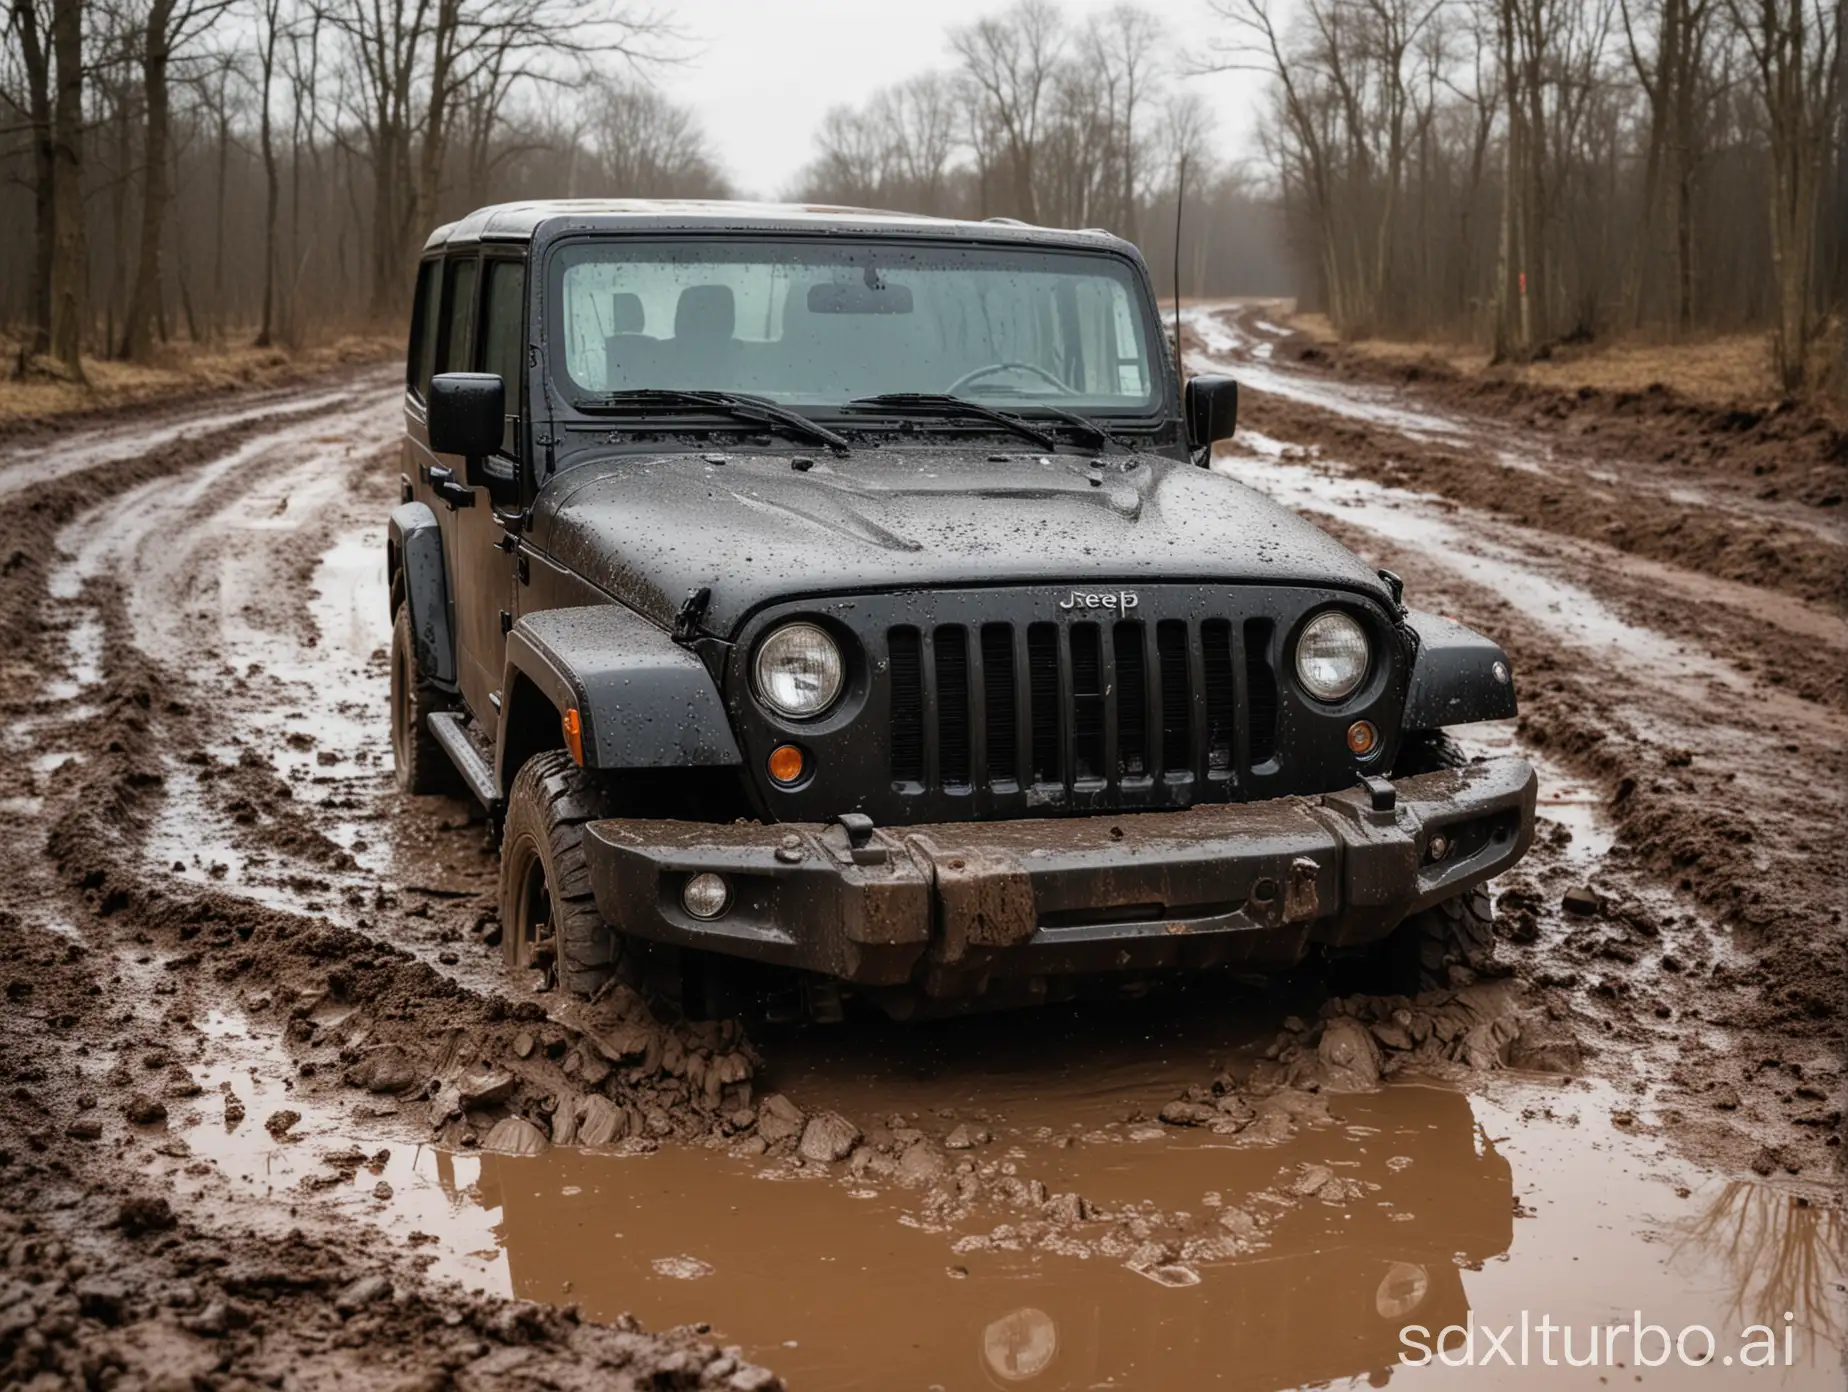 Black-Jeep-Stuck-in-Muddy-Road-OffRoad-Adventure-Gone-Wrong